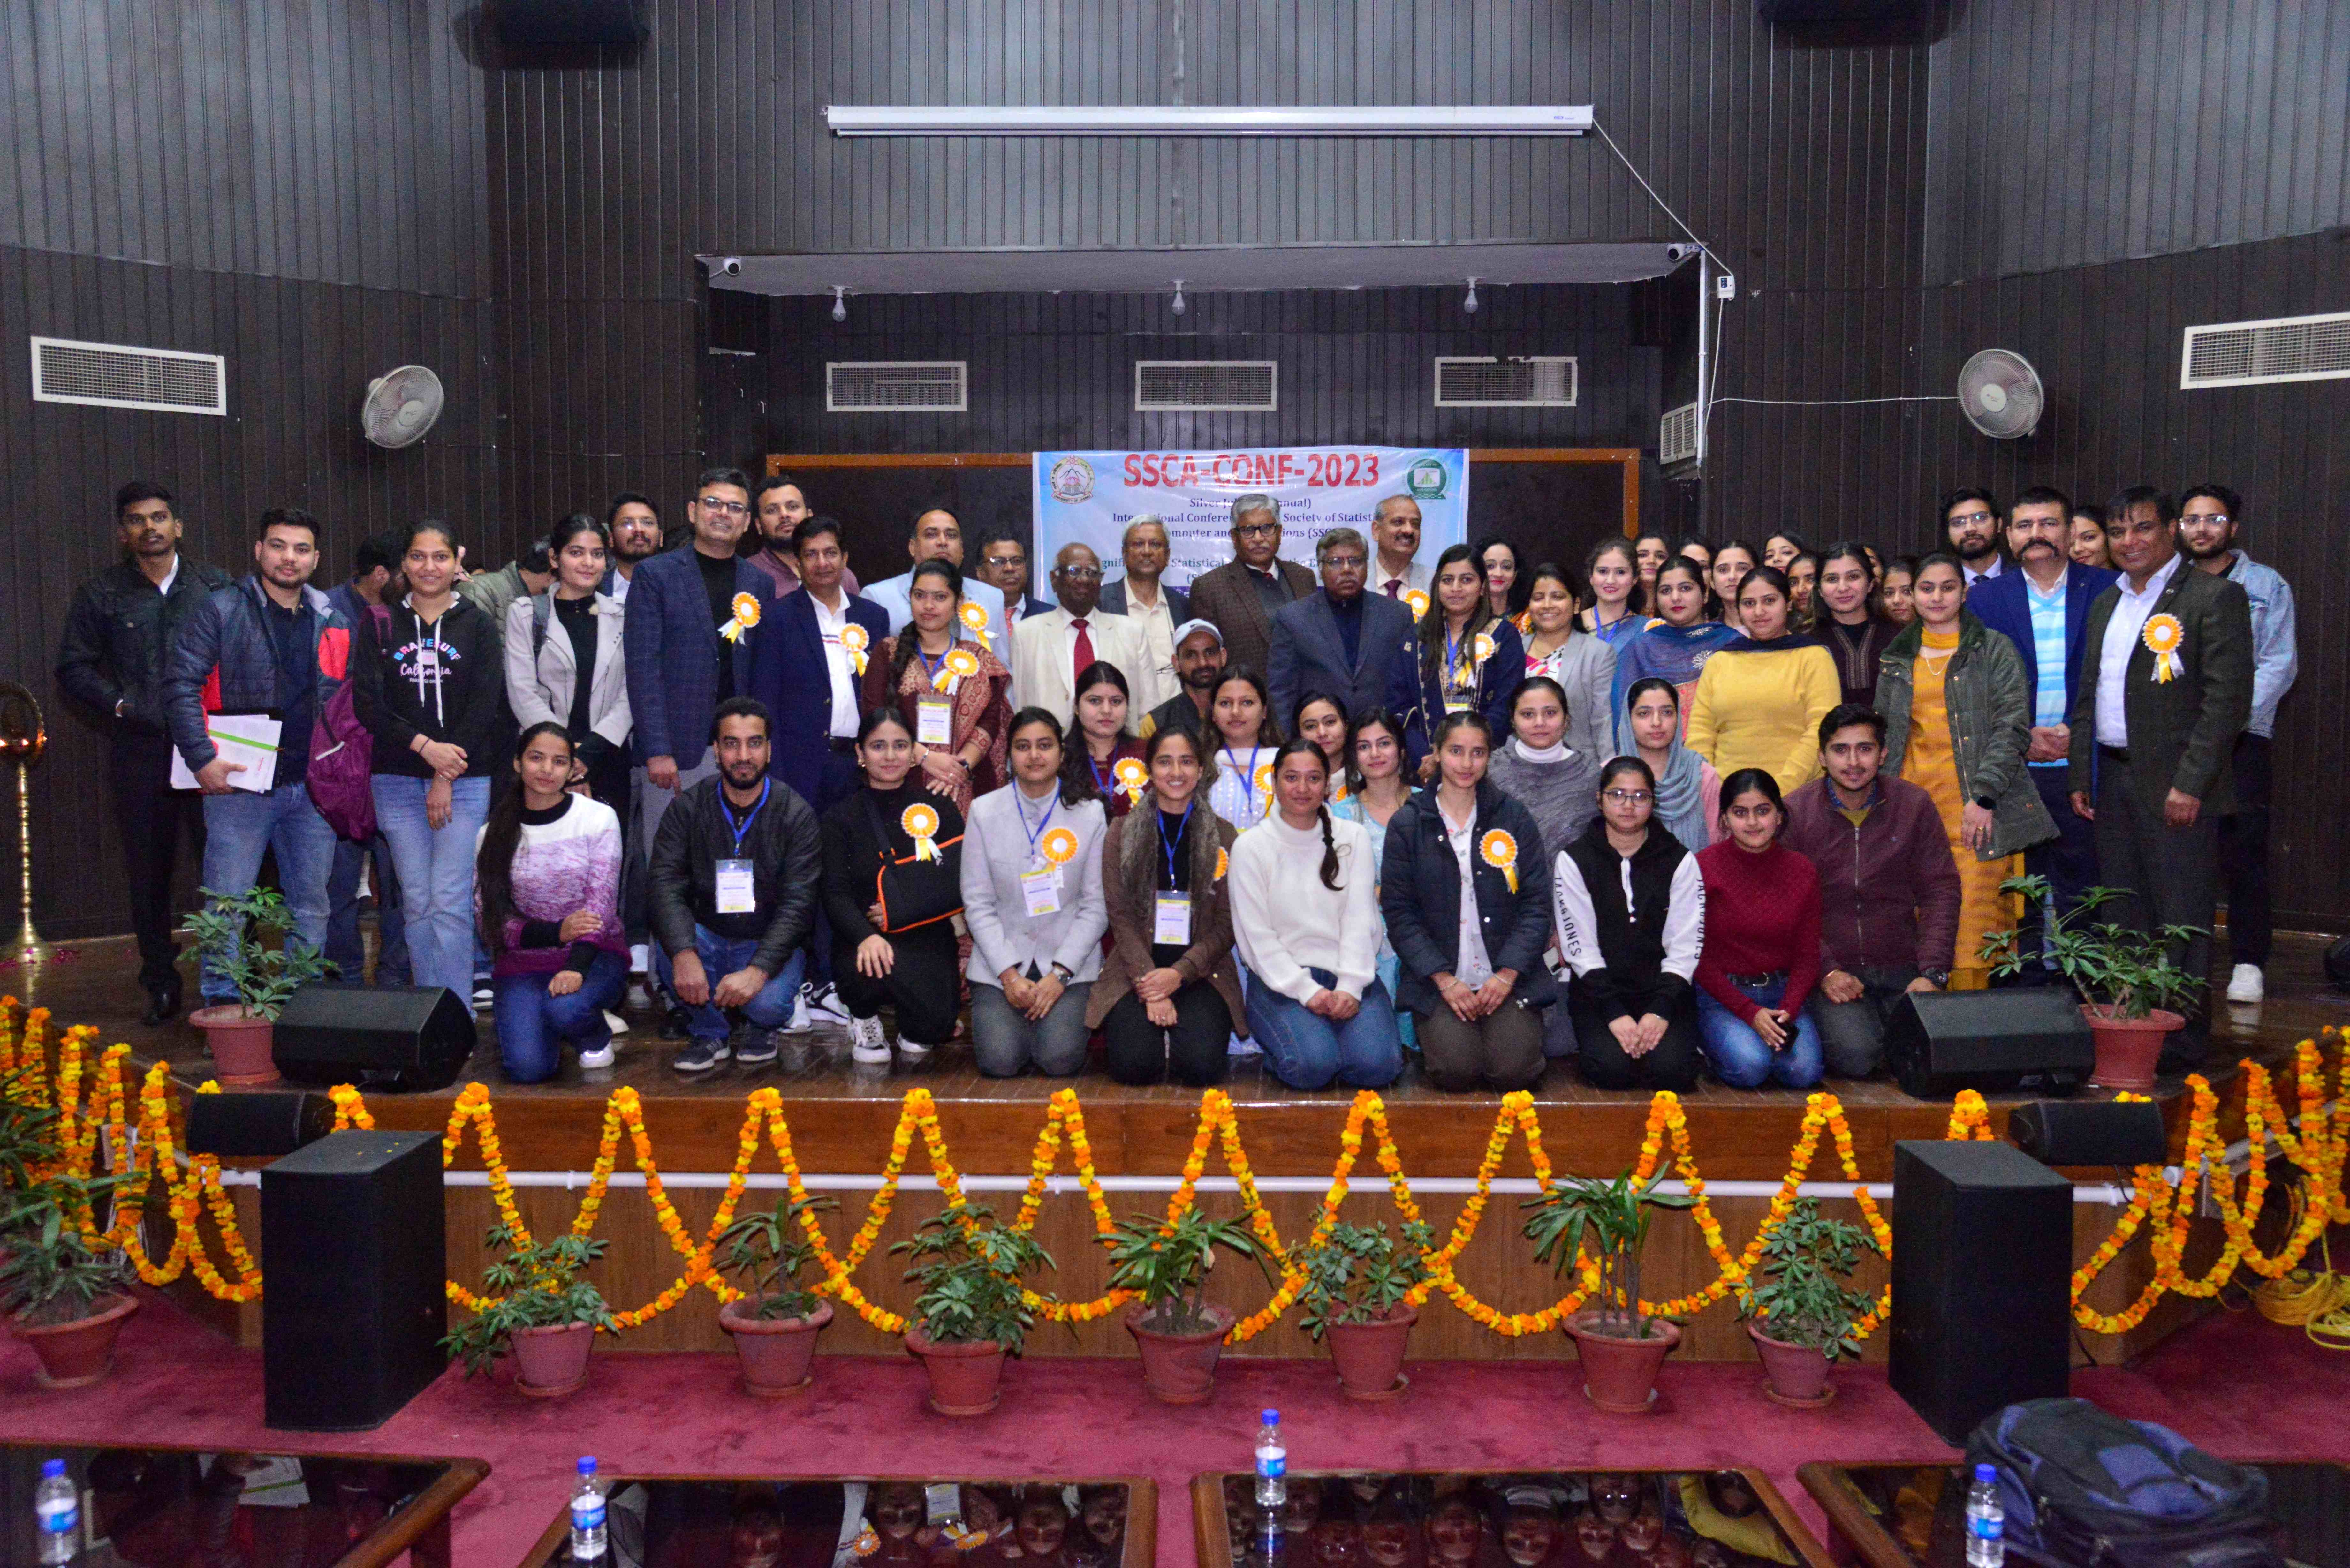 Participants of the International Conference organized by Department of Statistics